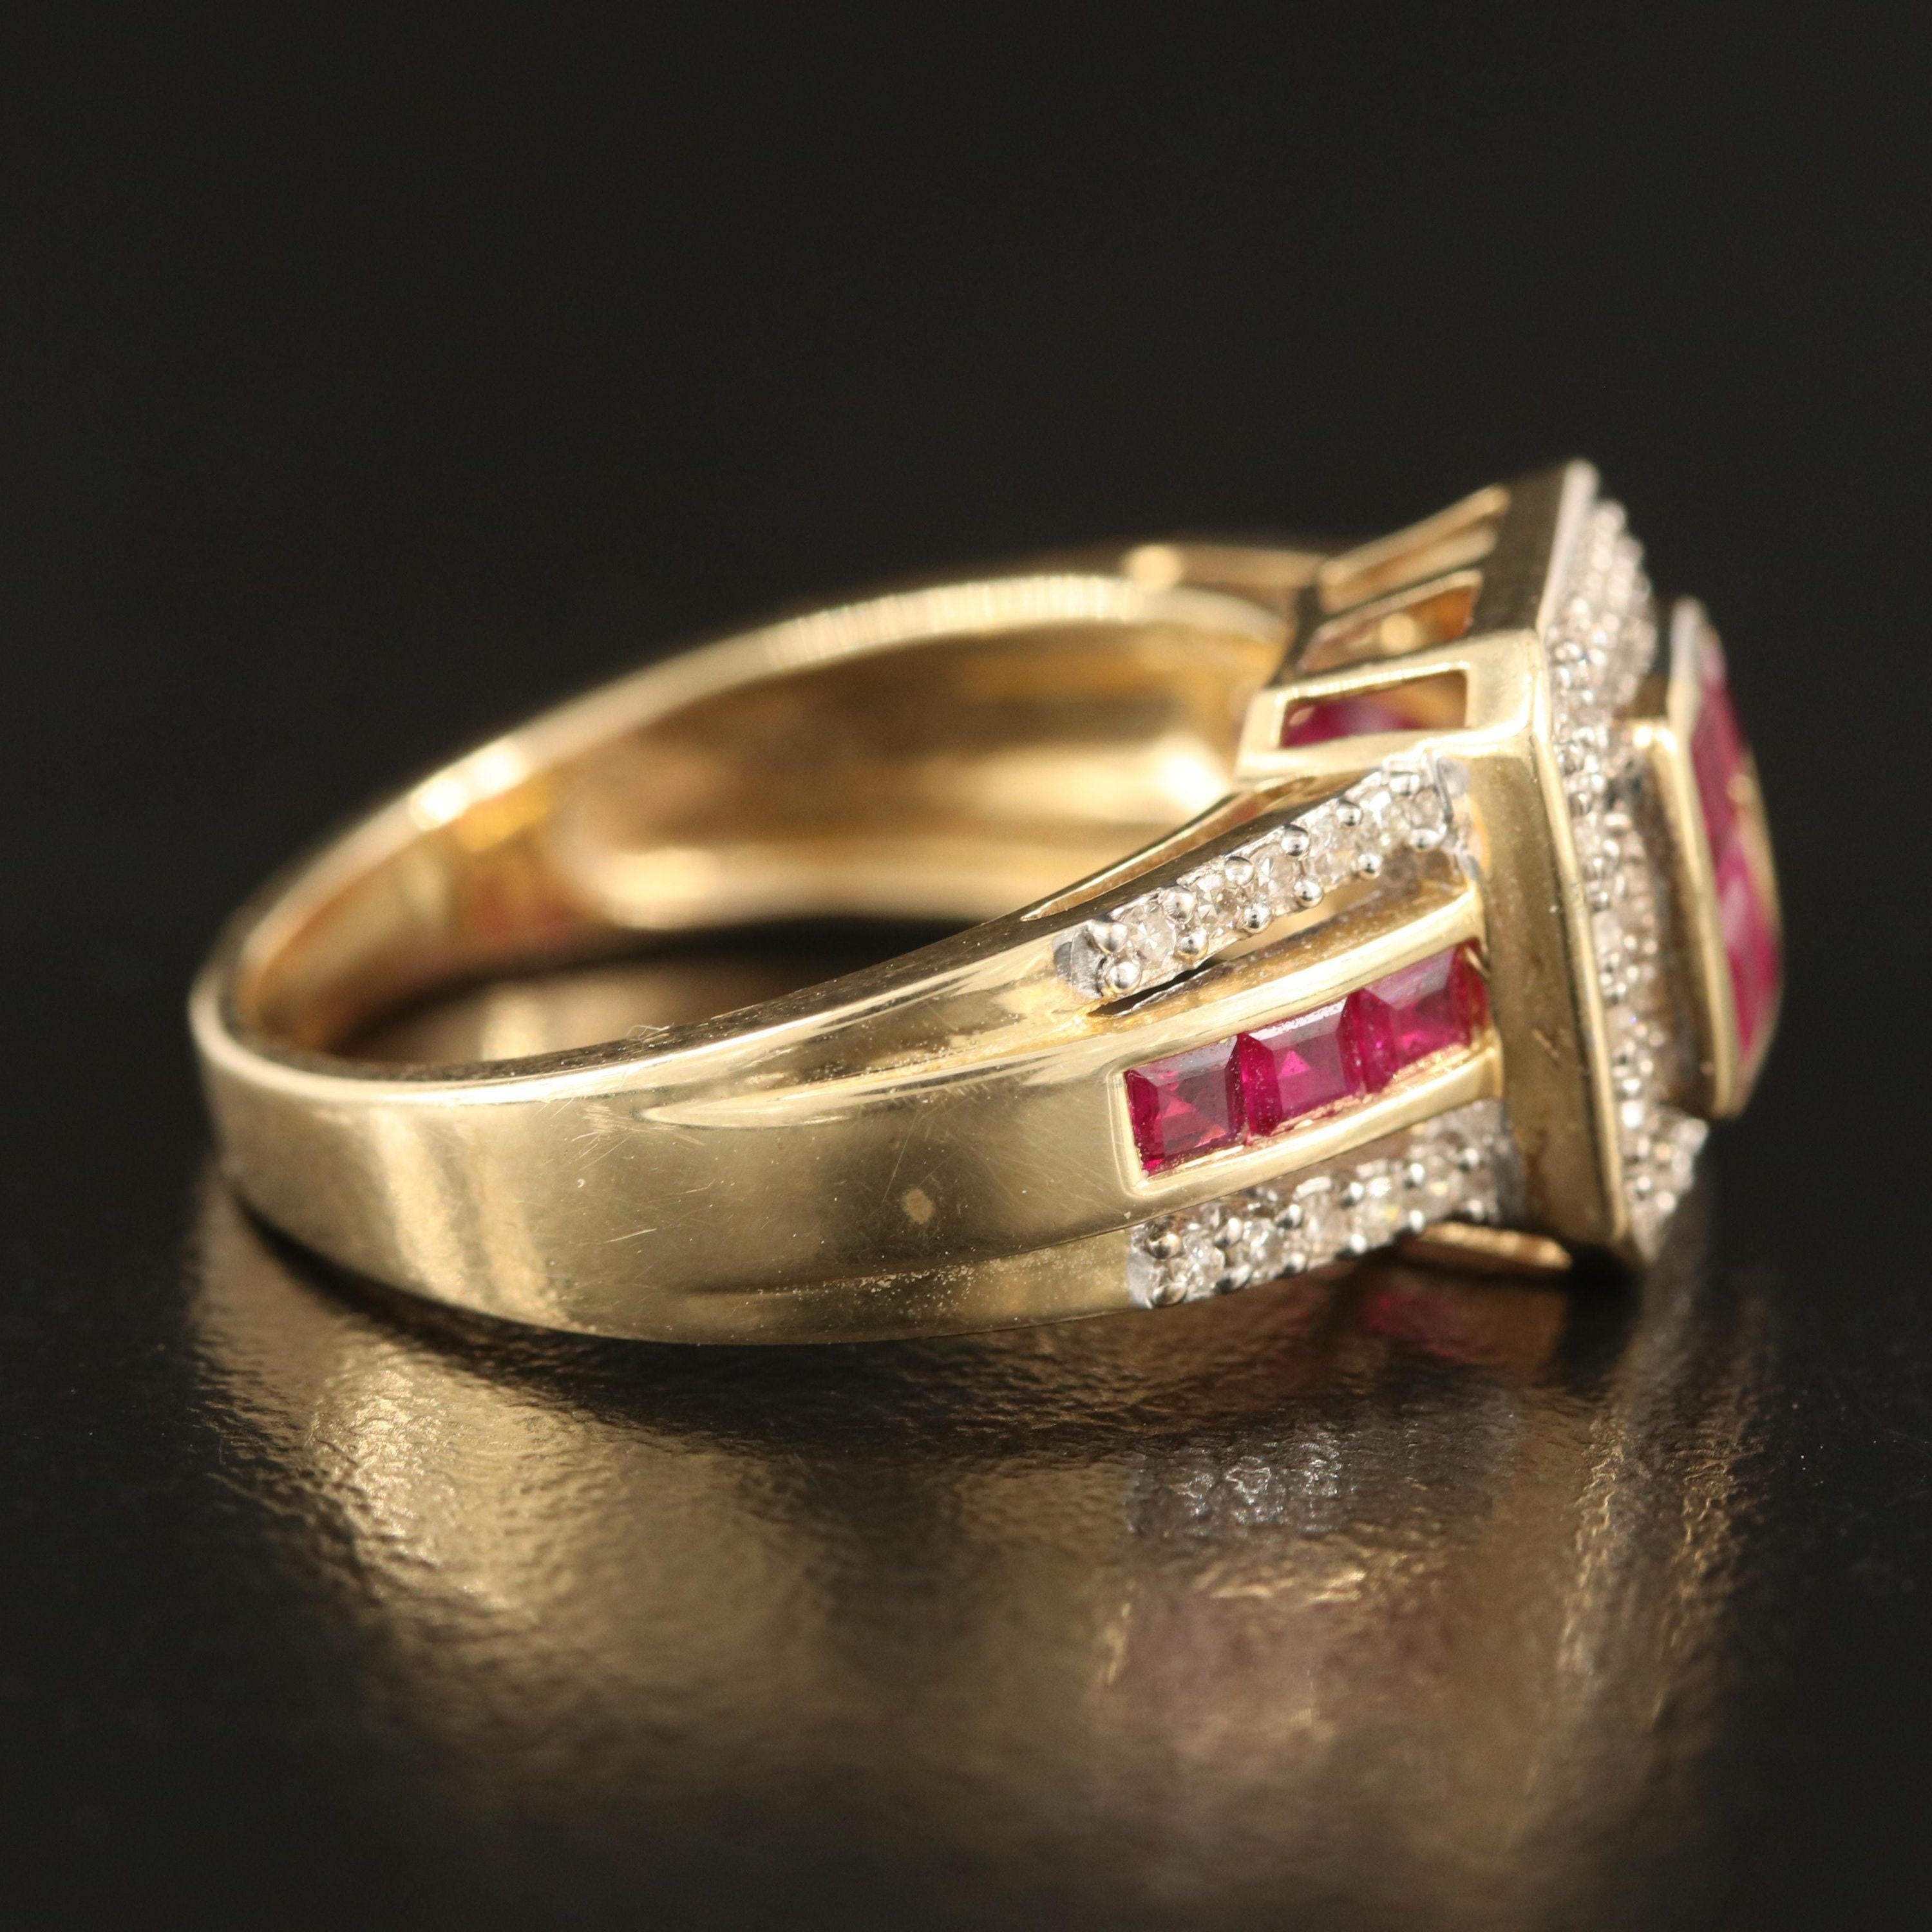 For Sale:  Art Deco Natural Ruby Diamond Engagement Ring Set in 18K Gold, Cocktail Ring 2